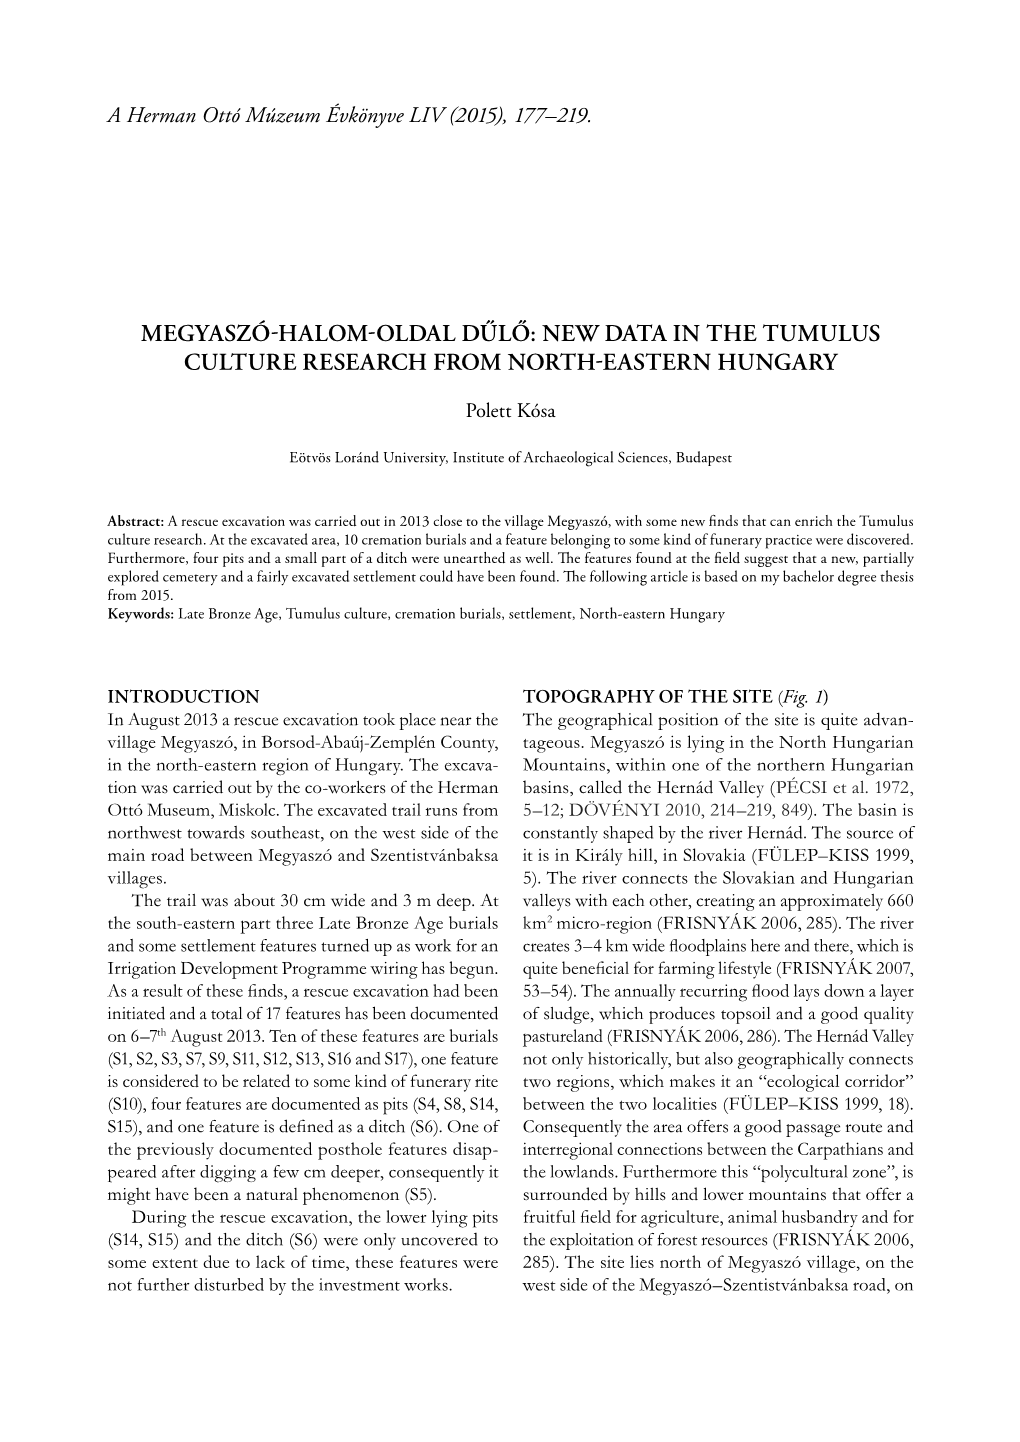 Megyaszó-Halom-Oldal Dűlő: New Data in the Tumulus Culture Research from North-Eastern Hungary